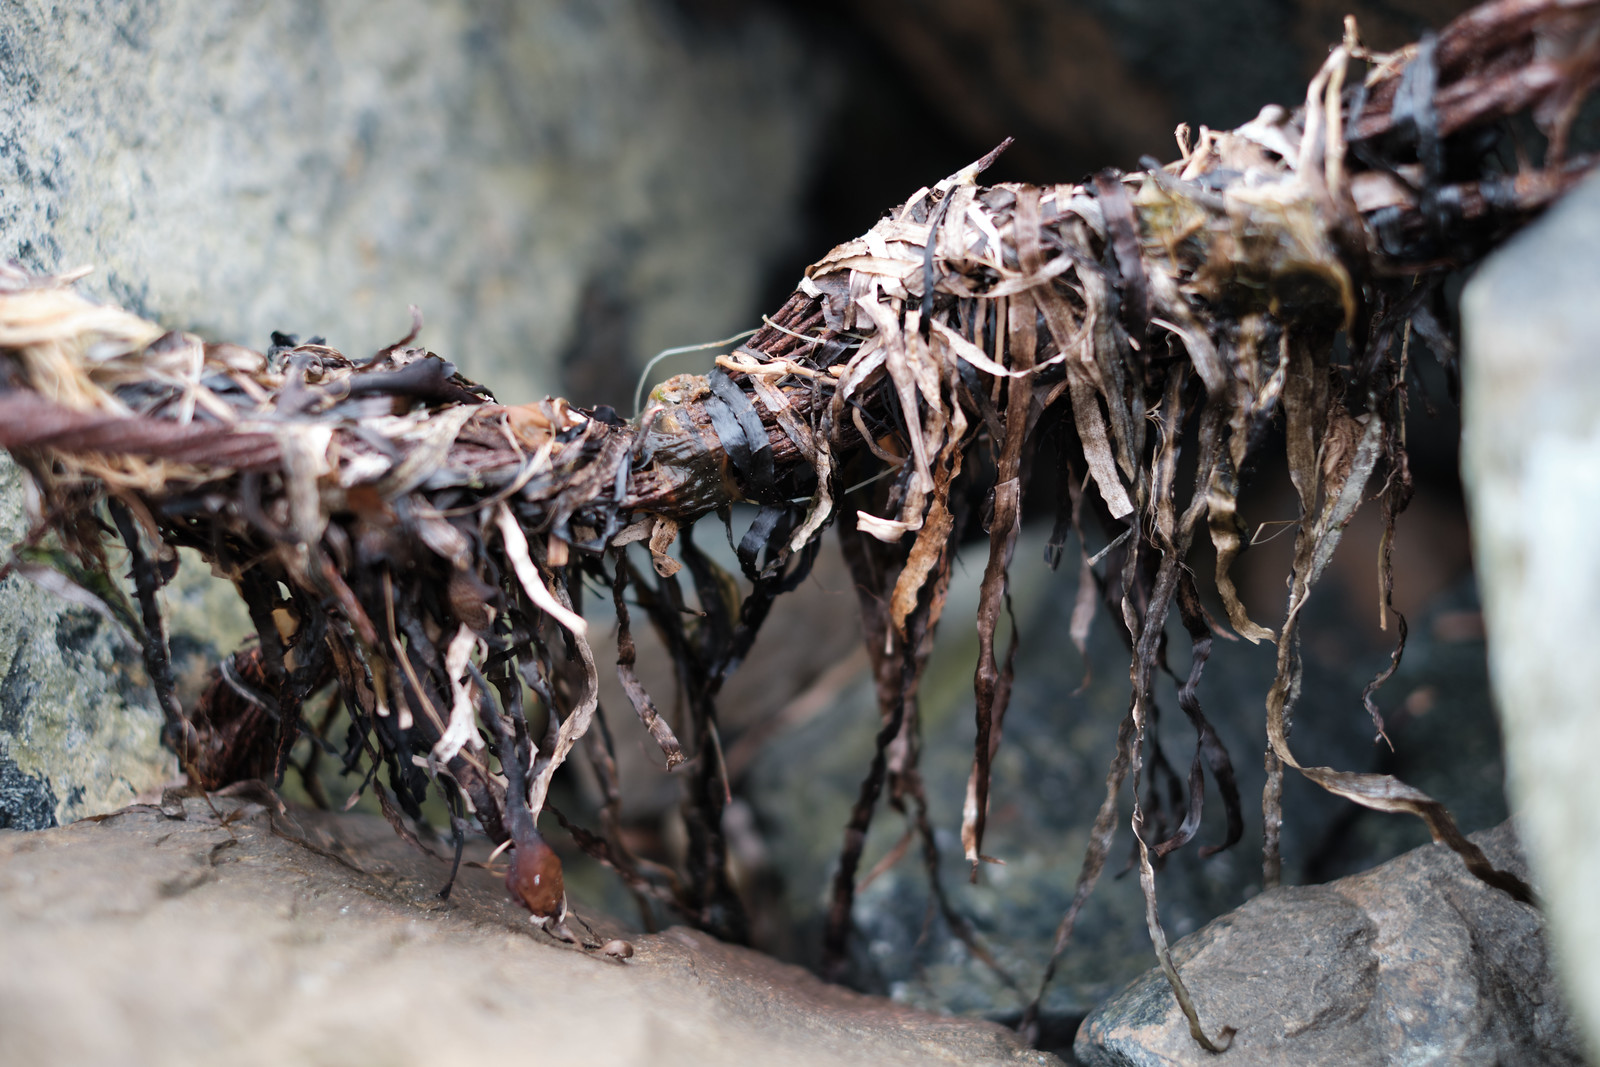 Old rusty cable between rocks with dried seaweed hanging from it.